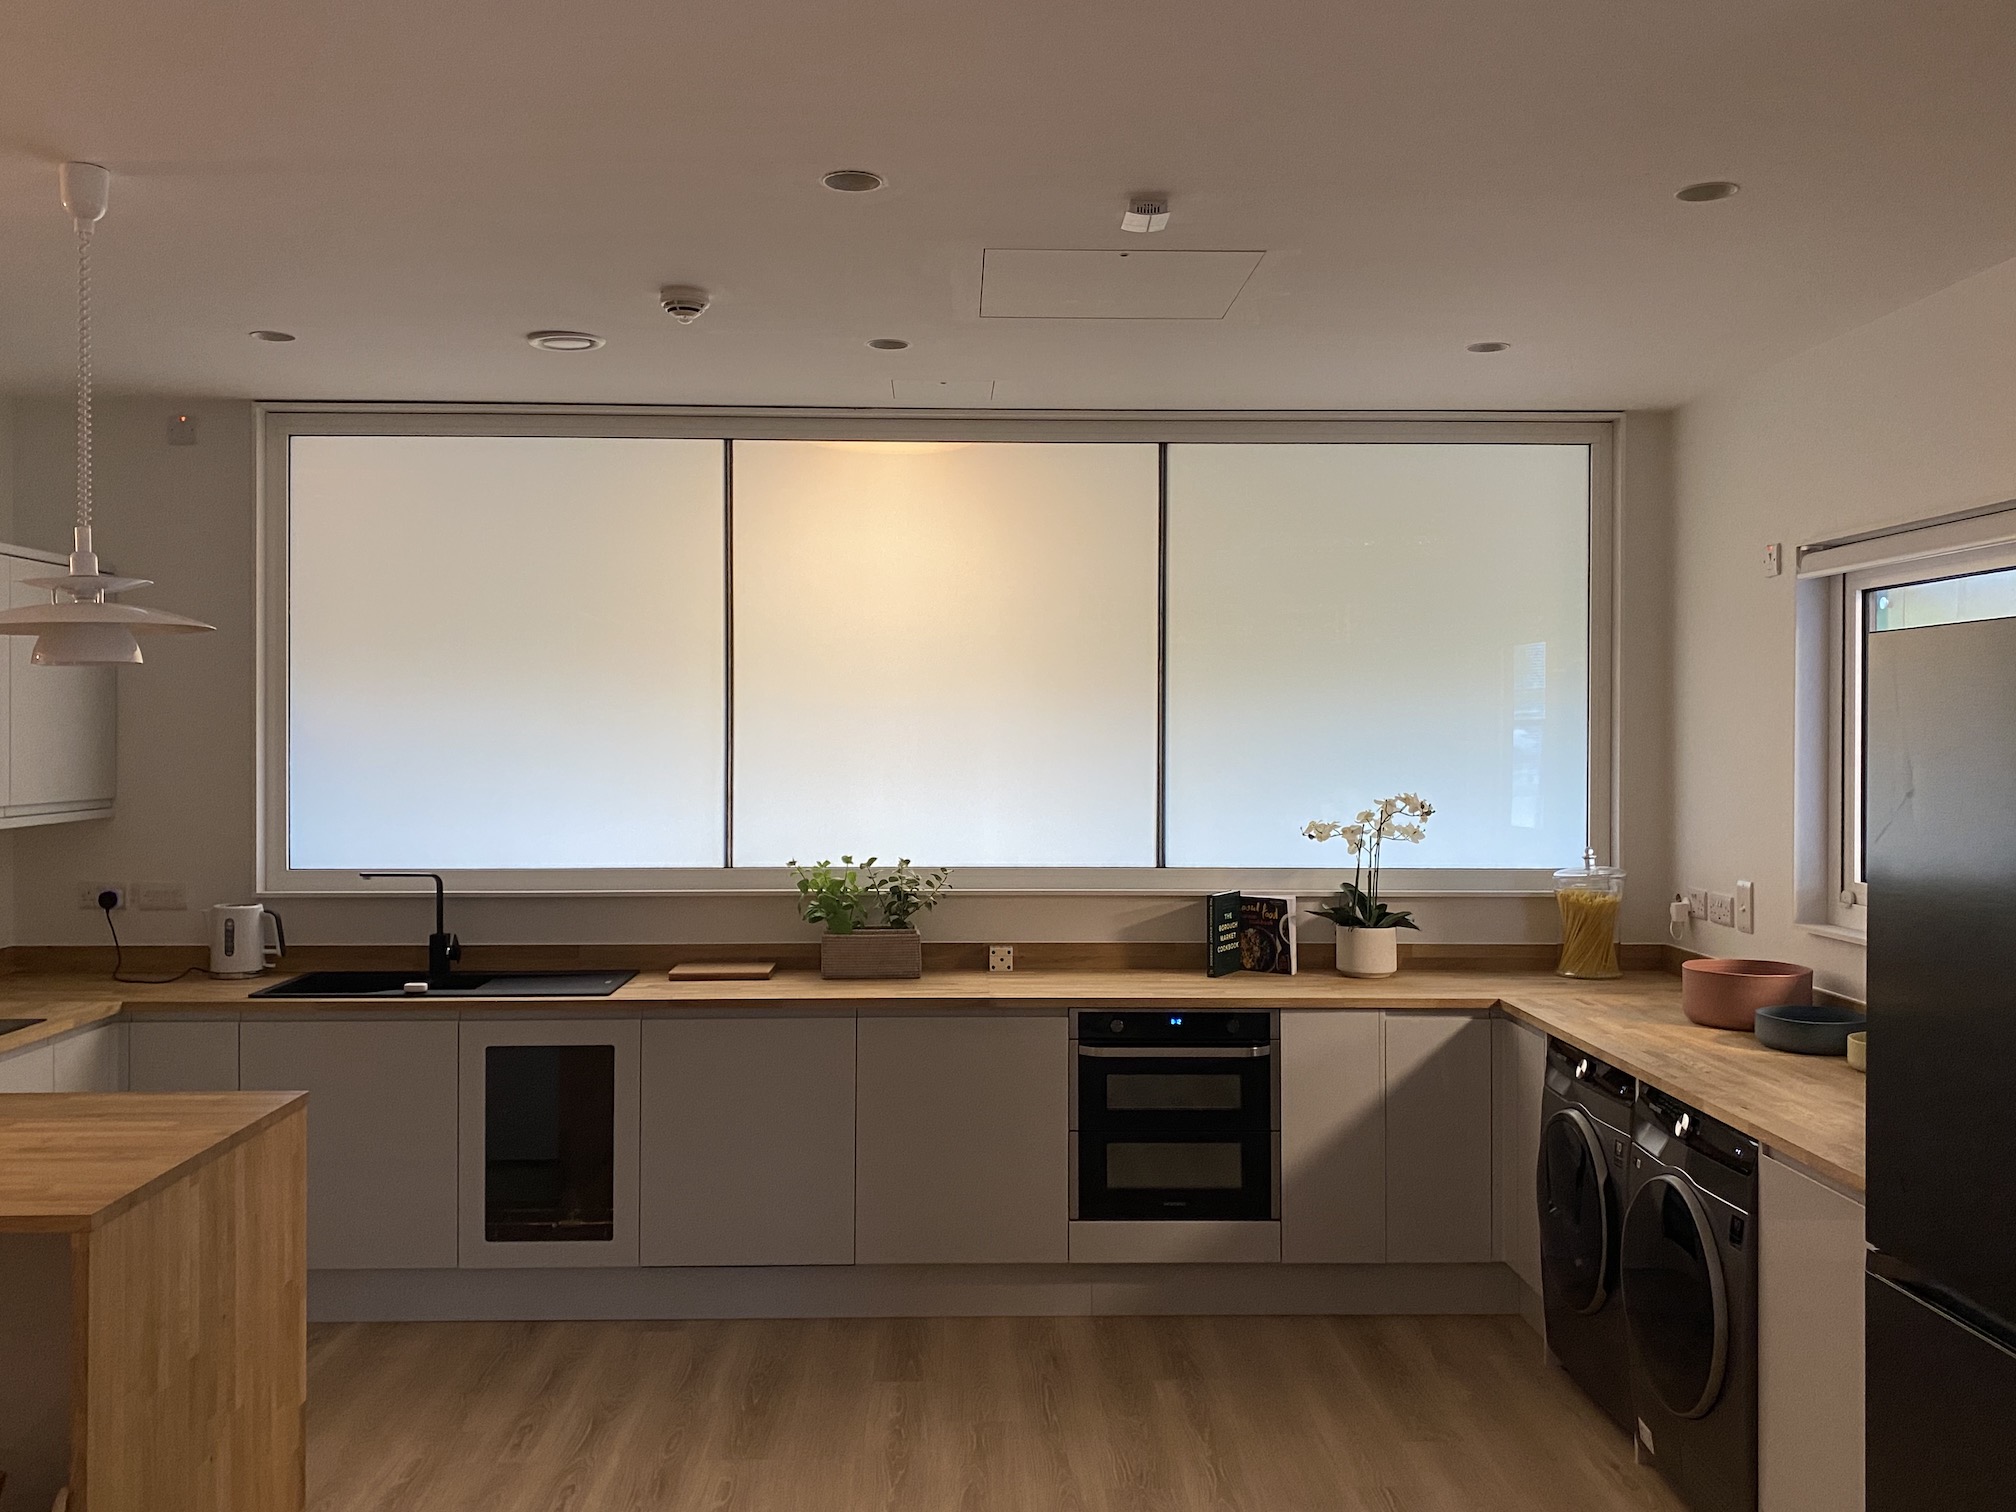 Privacy Glass panels deliver privacy at the flick of a switch while still allowing light to move through a property.